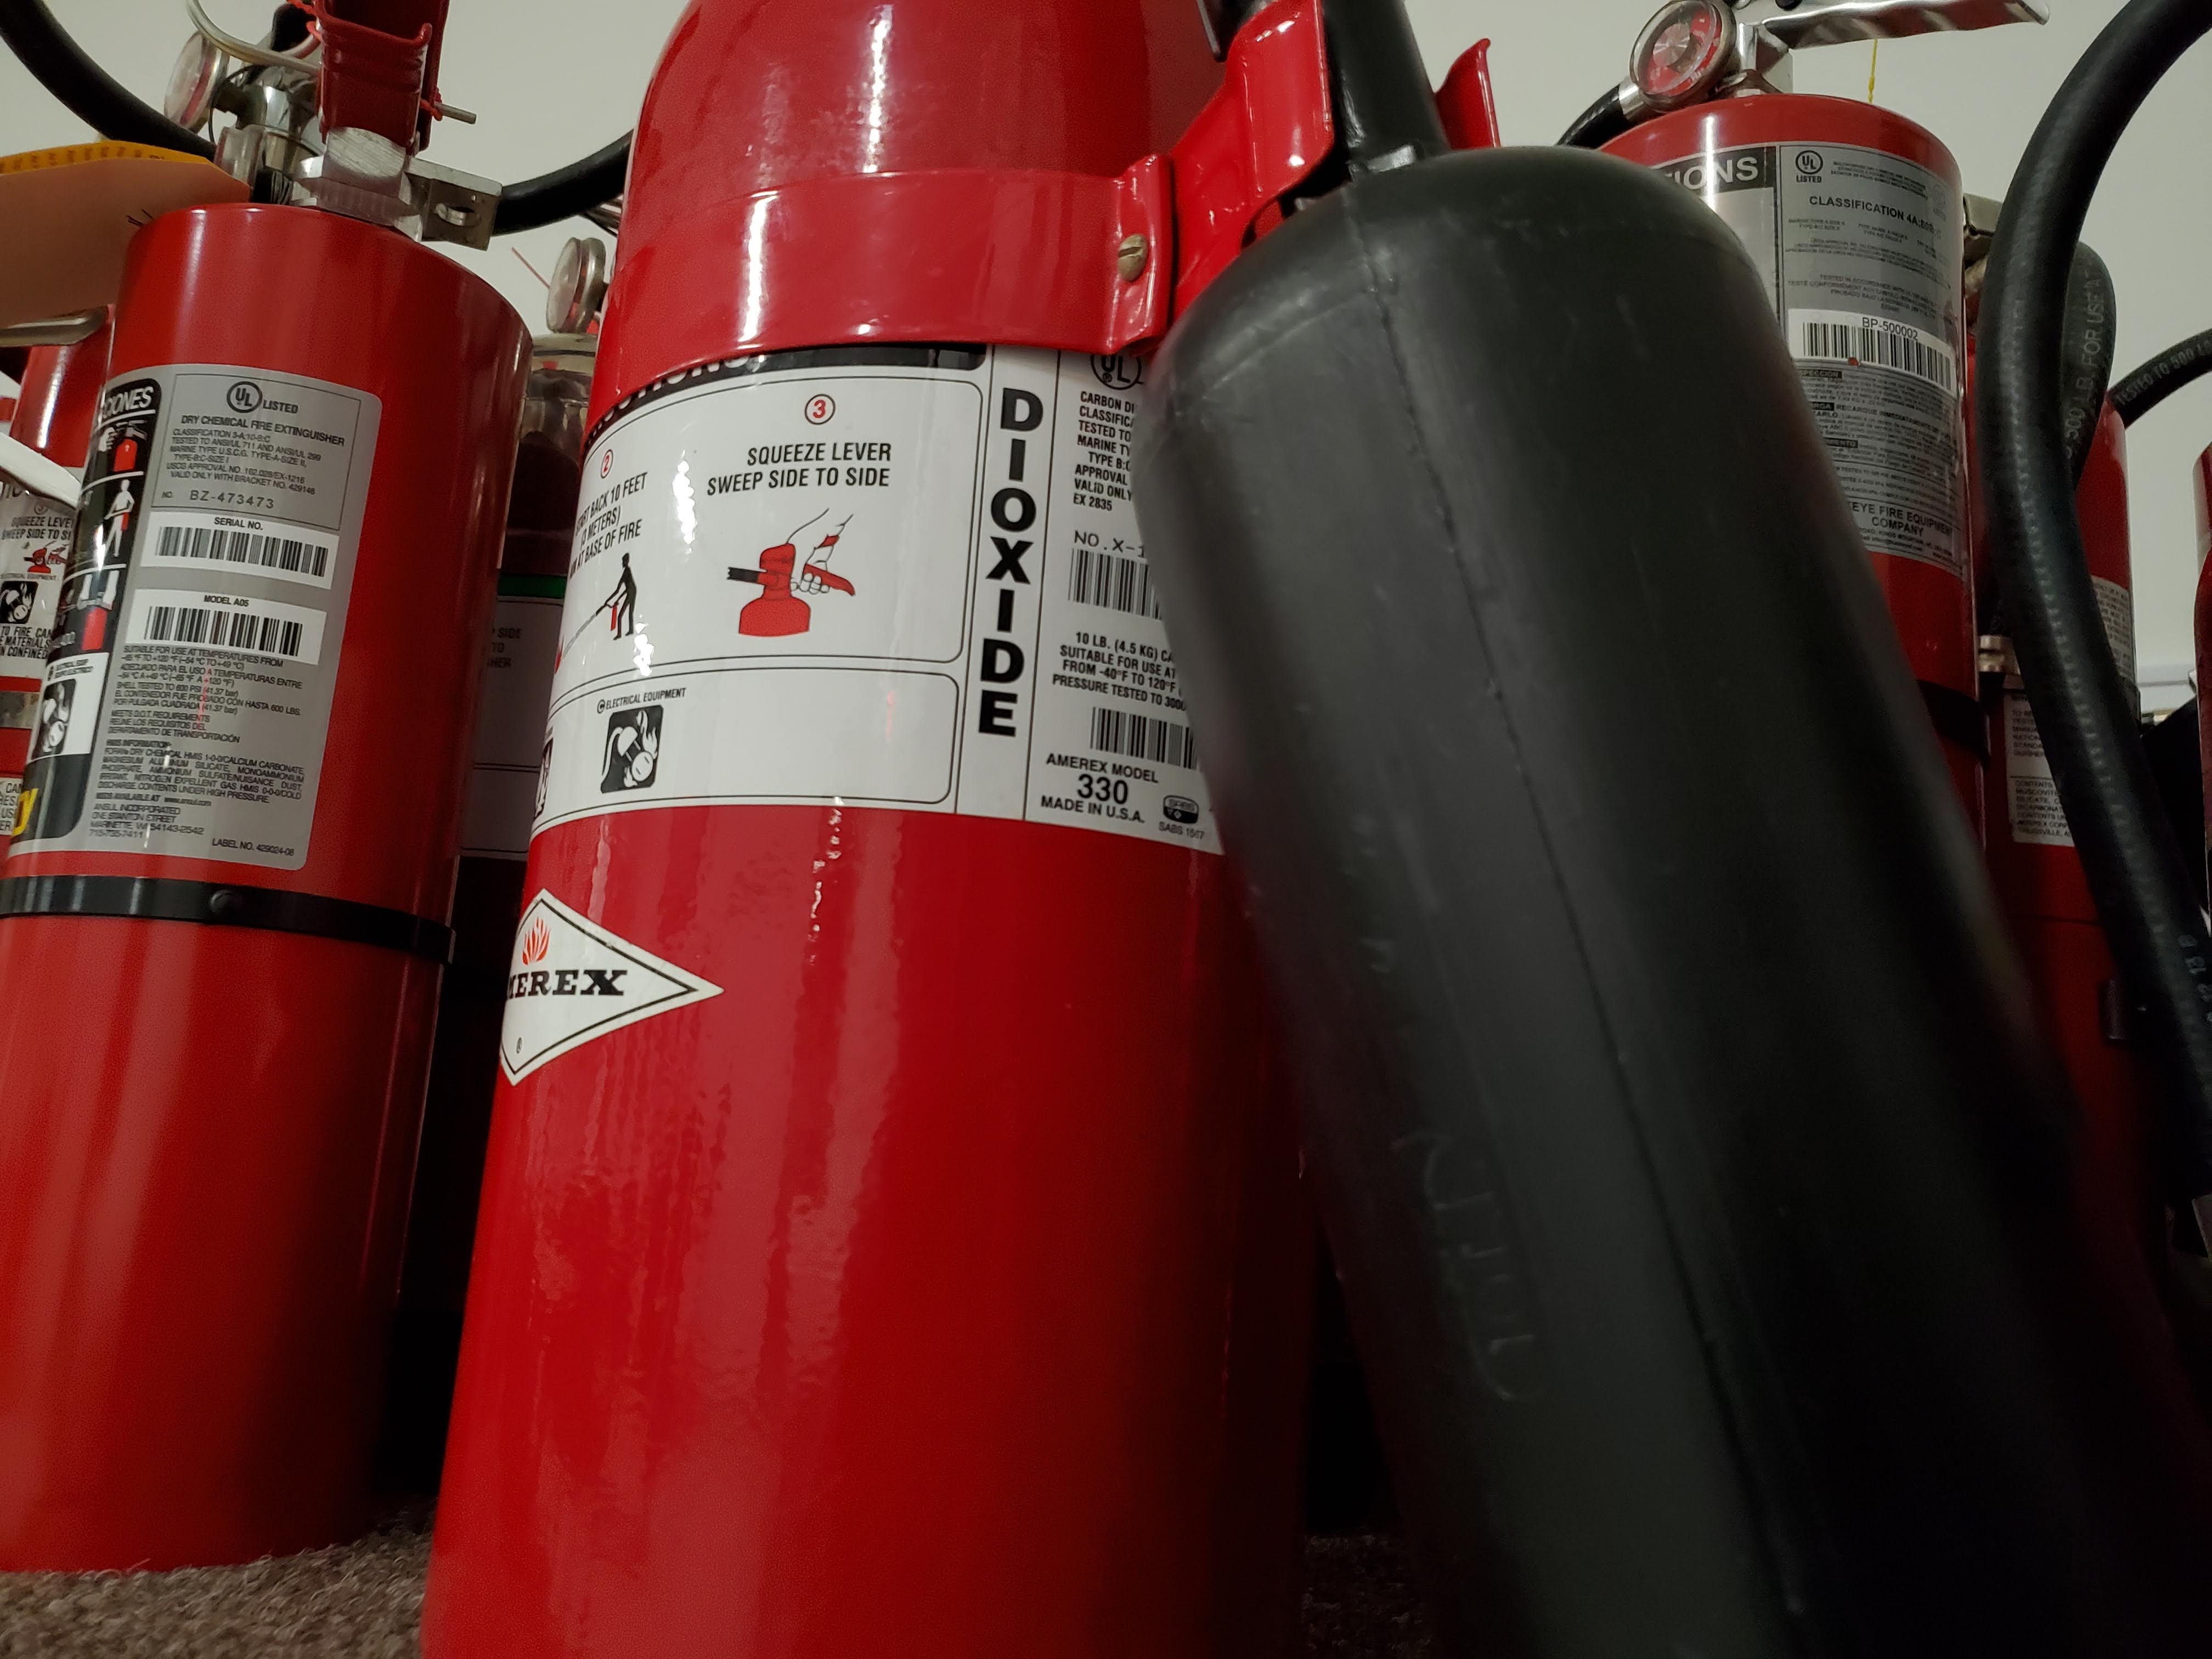 general use fire extinguisher